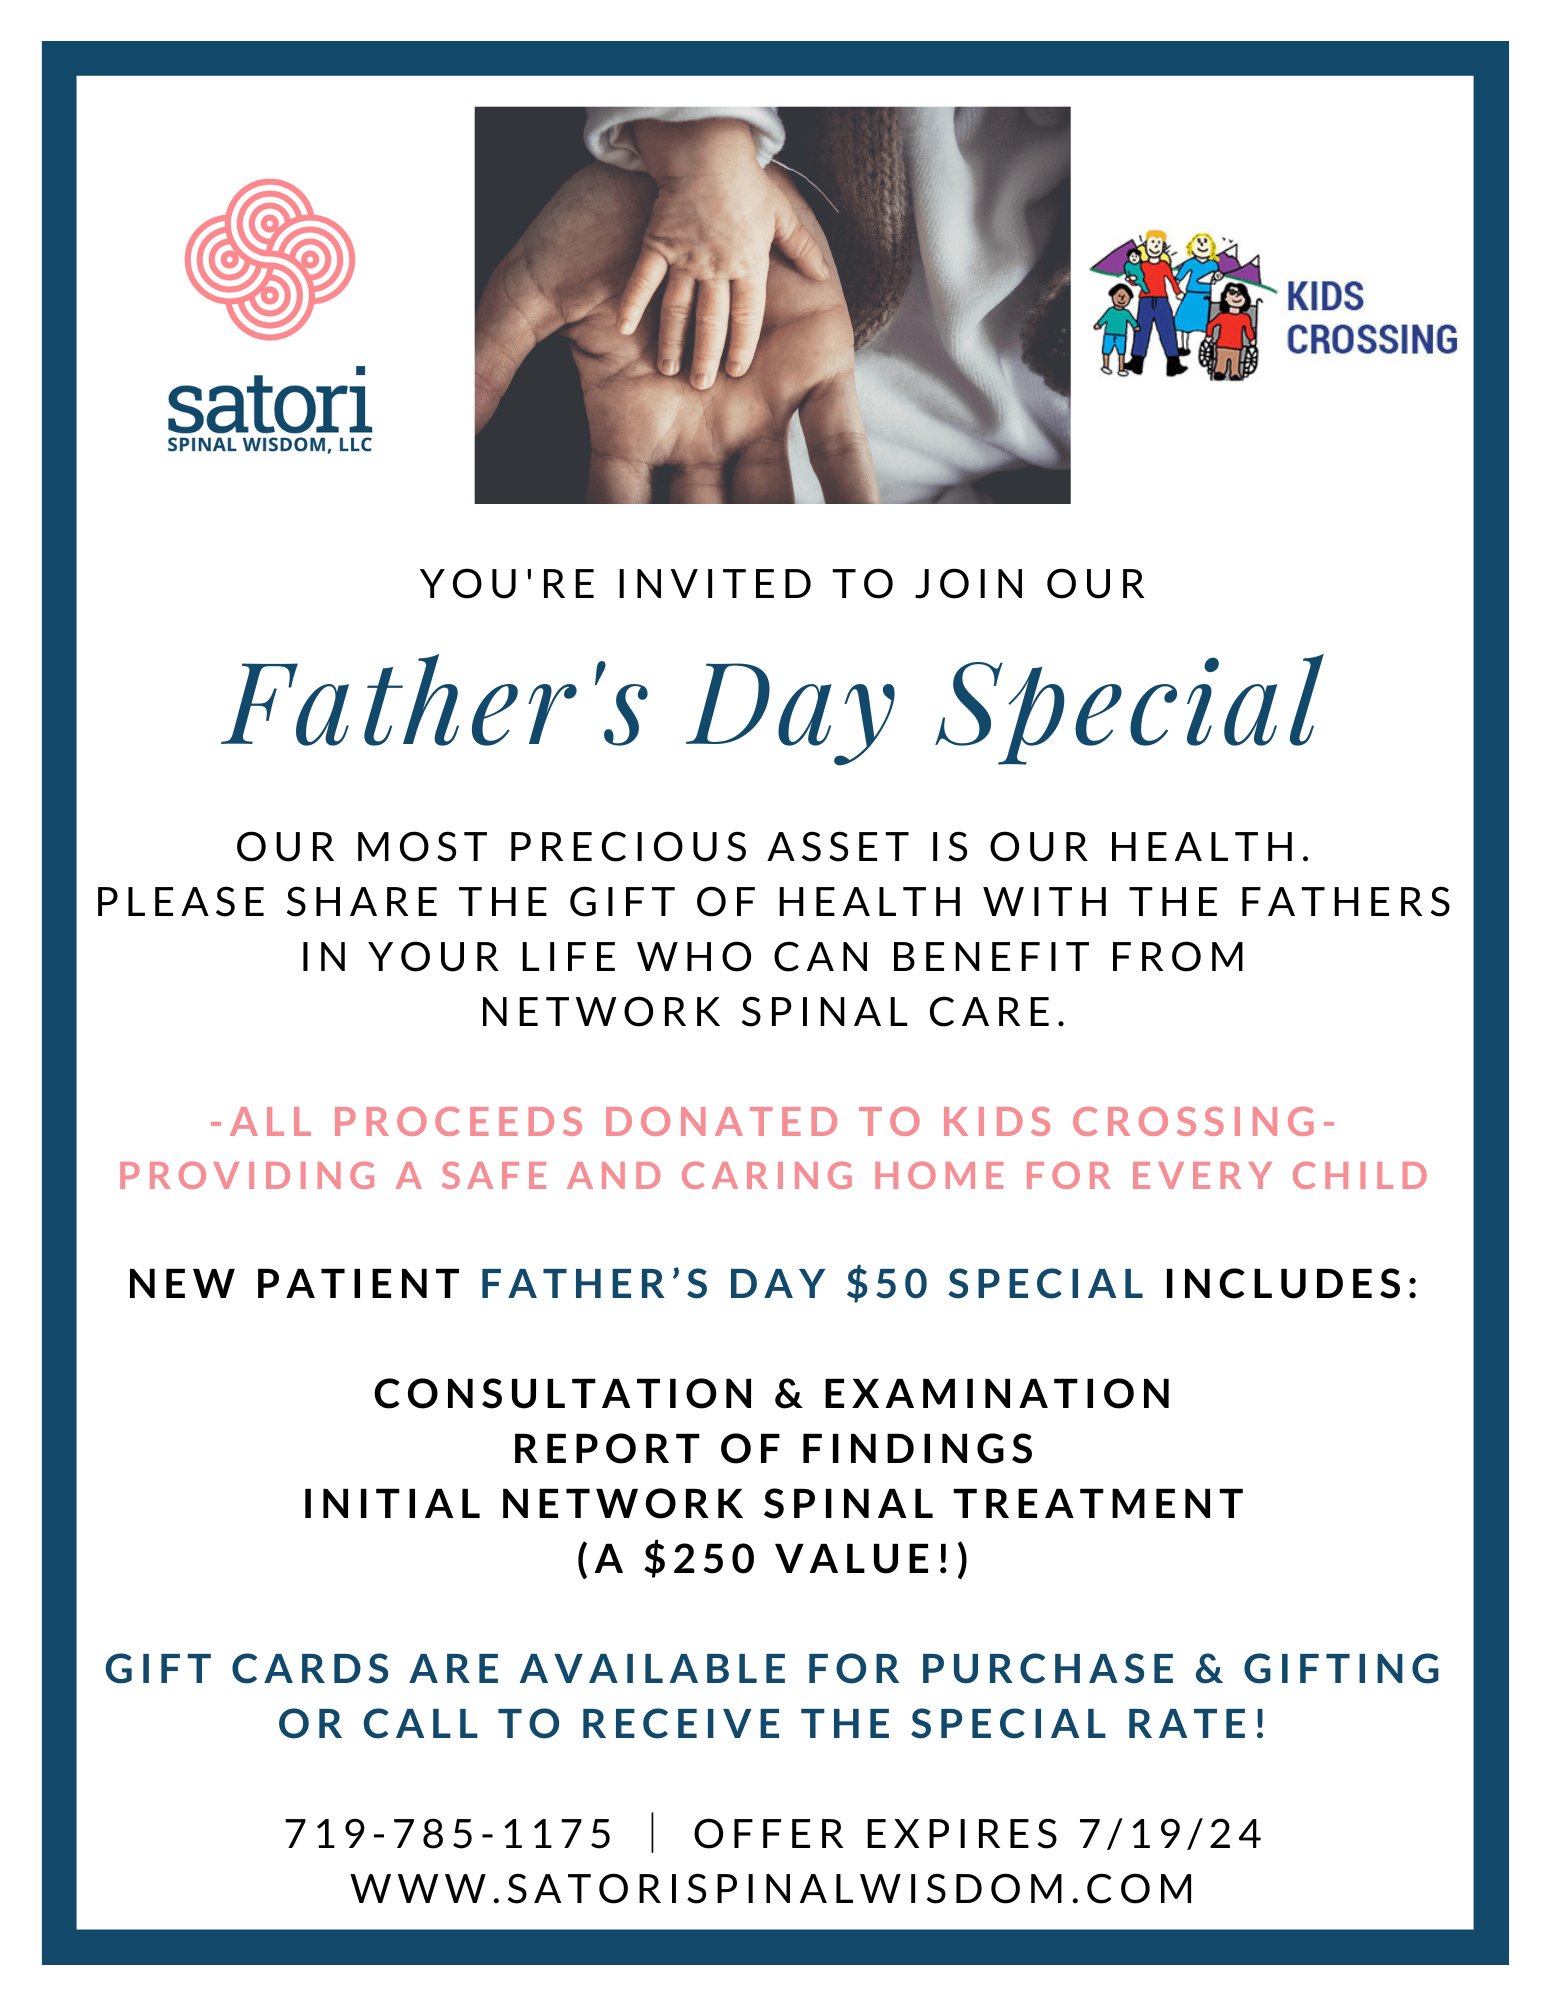 Father's Day Promo